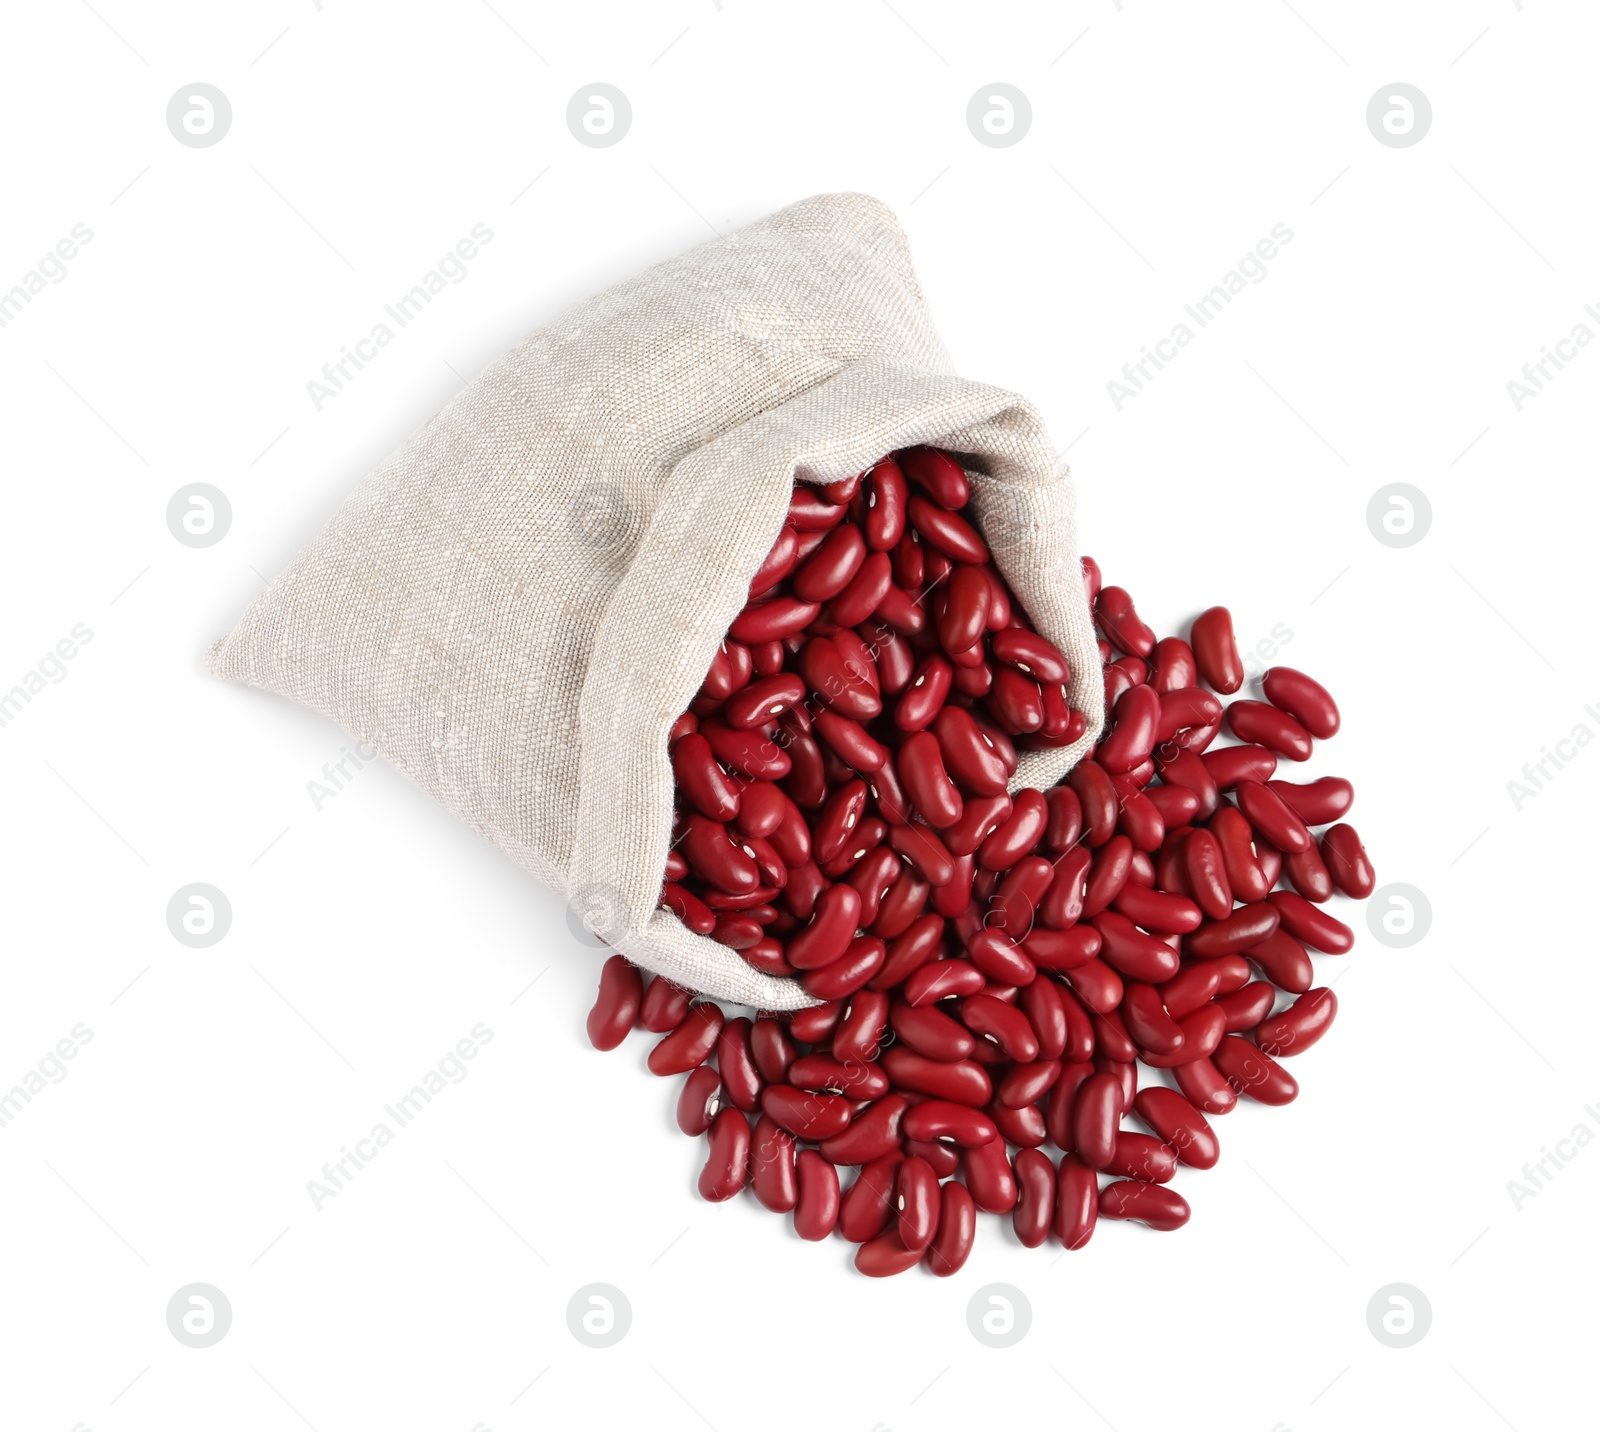 Photo of Raw red kidney beans with sackcloth bag isolated on white, top view